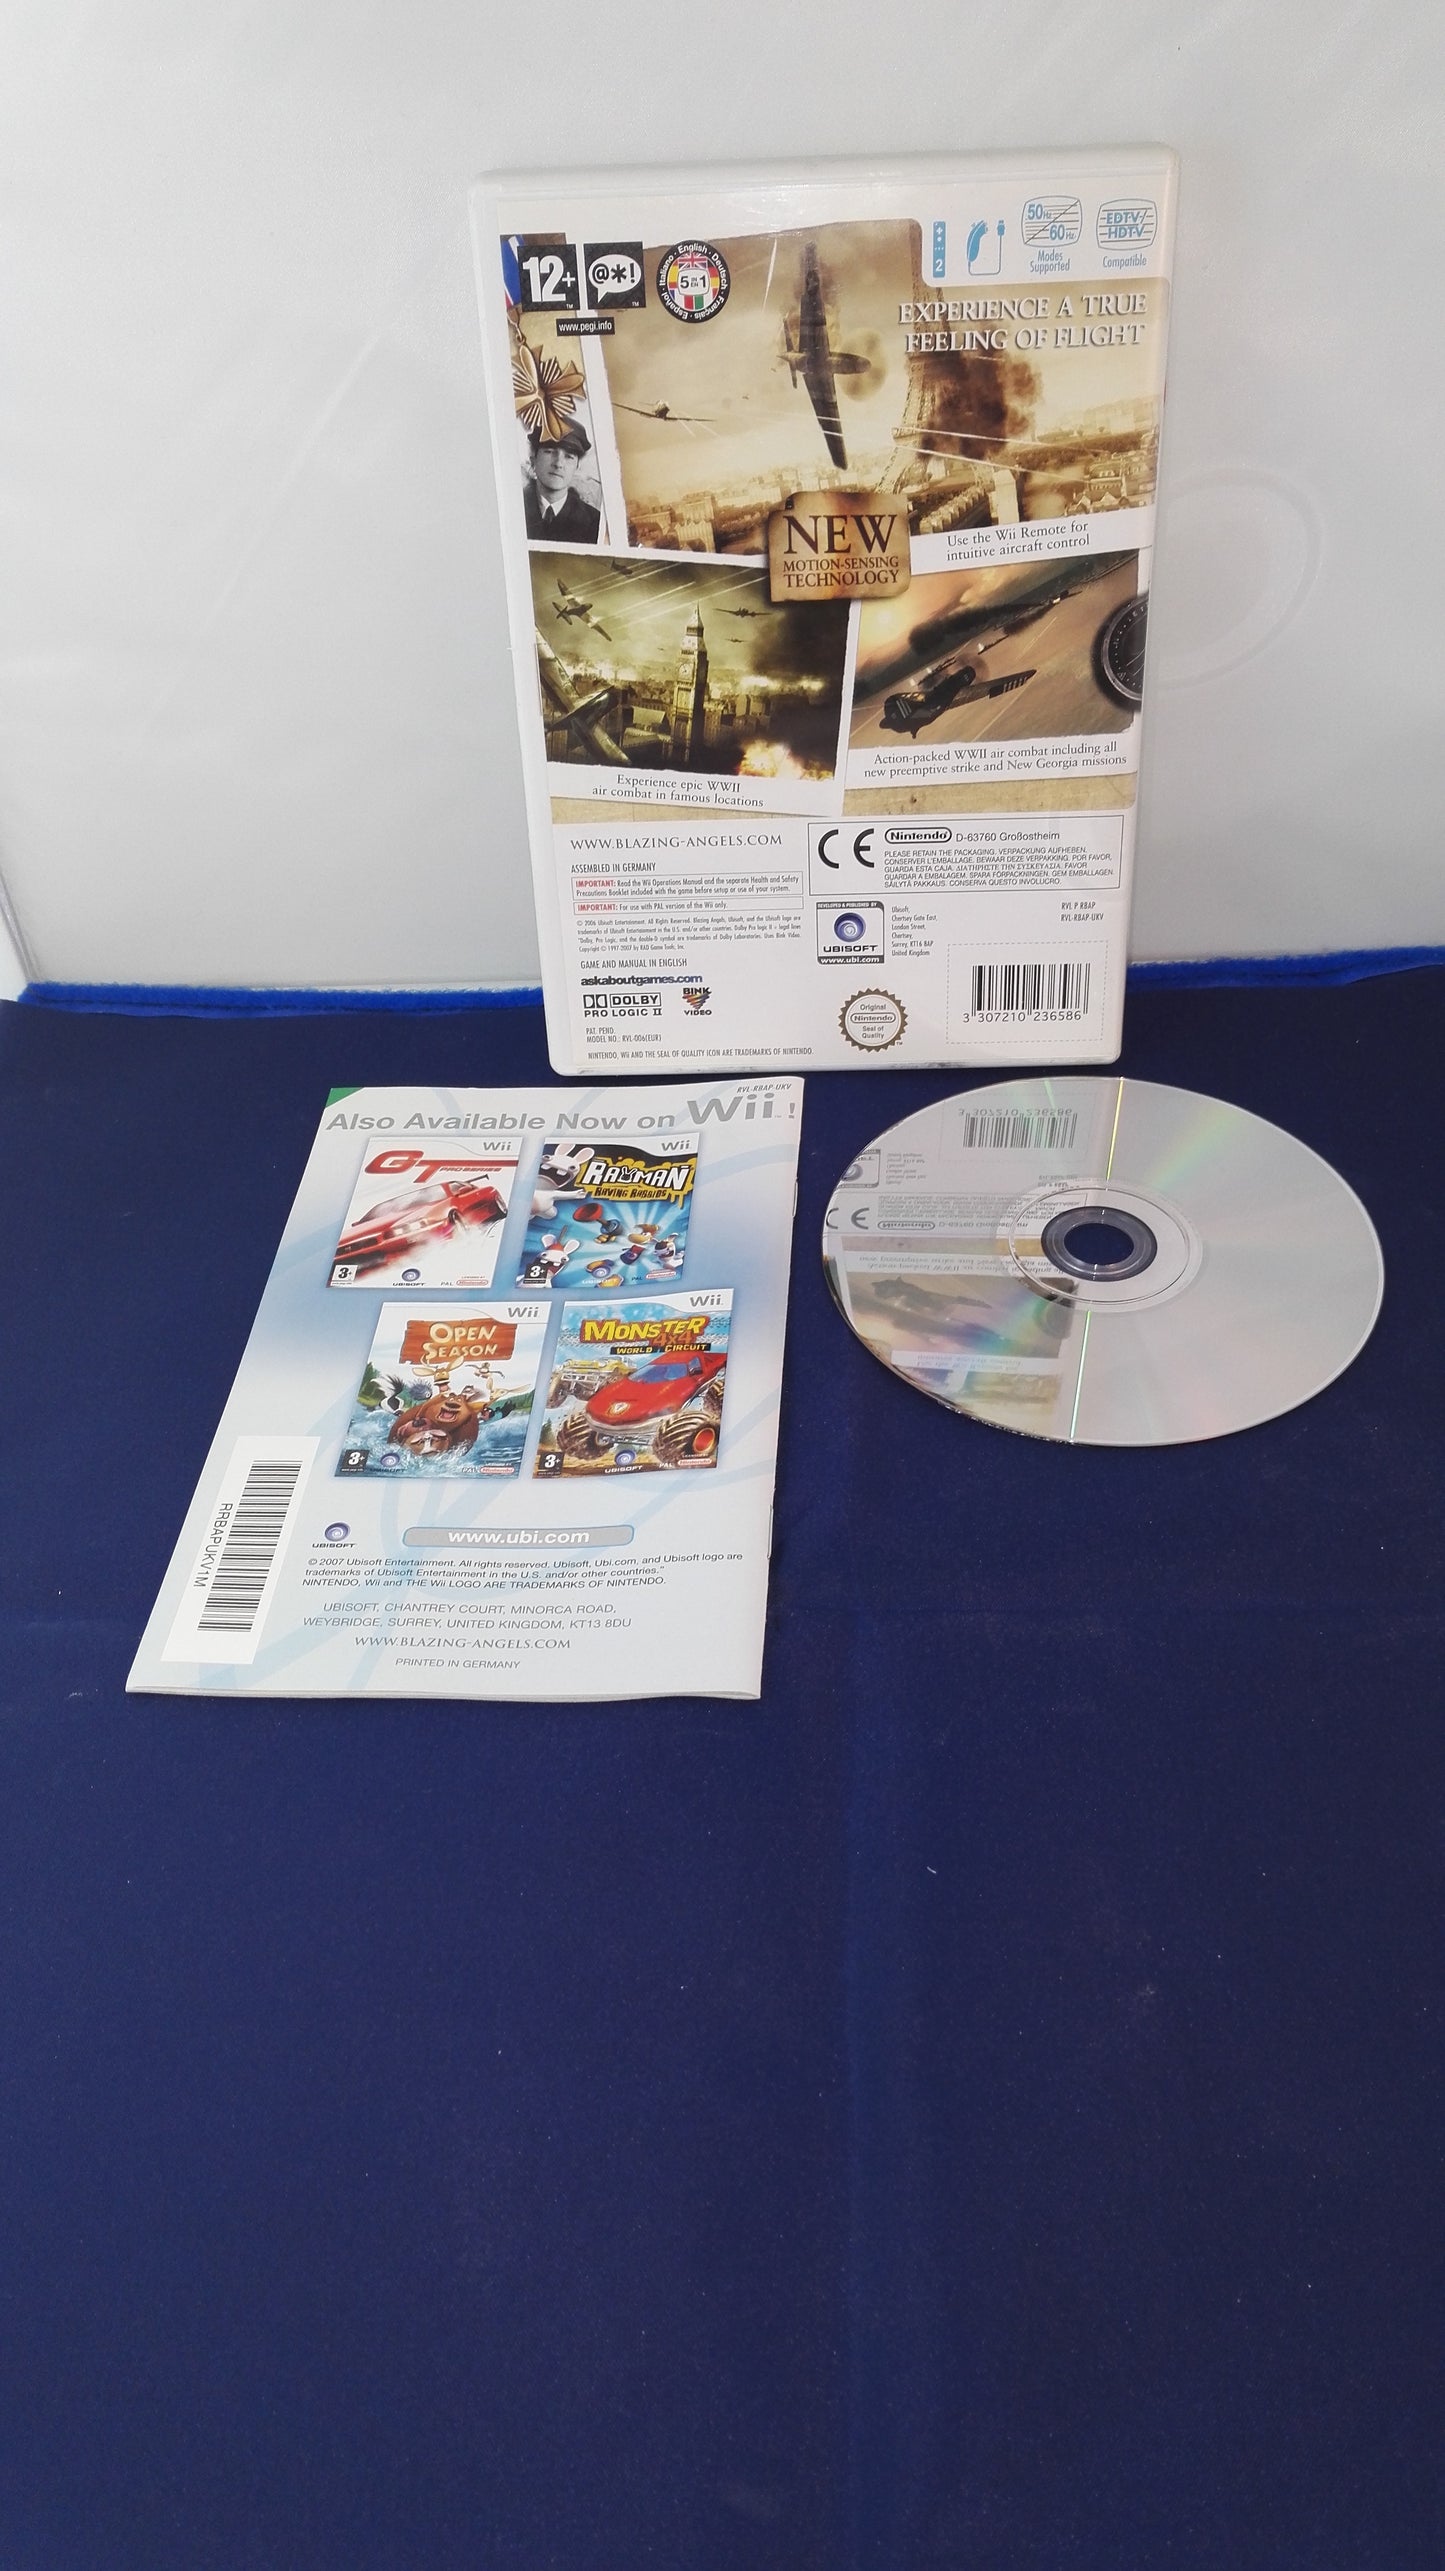 Blazing Angels: Squadrons of WWII Nintendo Wii Game